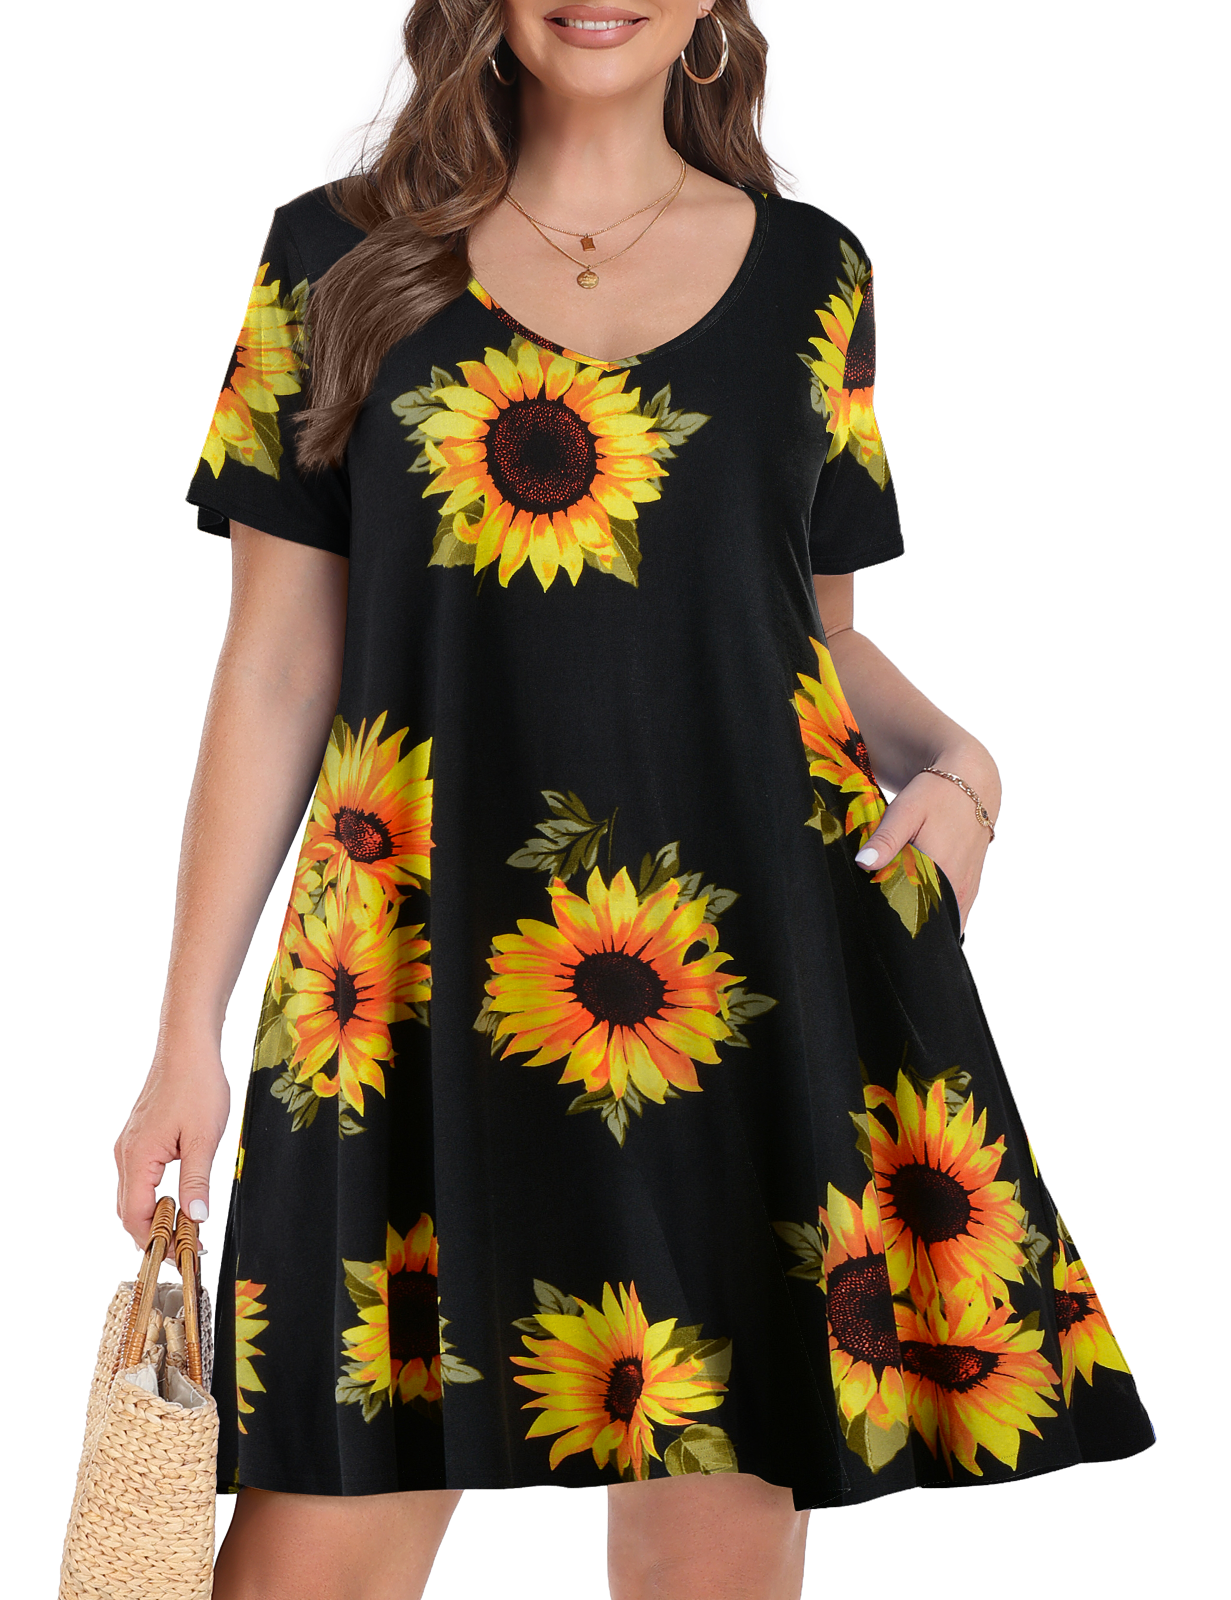 Plus Size Dresses 5X for Women, VEPKUL V Neck T Shirt Dress 2024 Short Sleeve Casual Loose Swing Summer Dress Floral Printed with Pockets - image 1 of 9